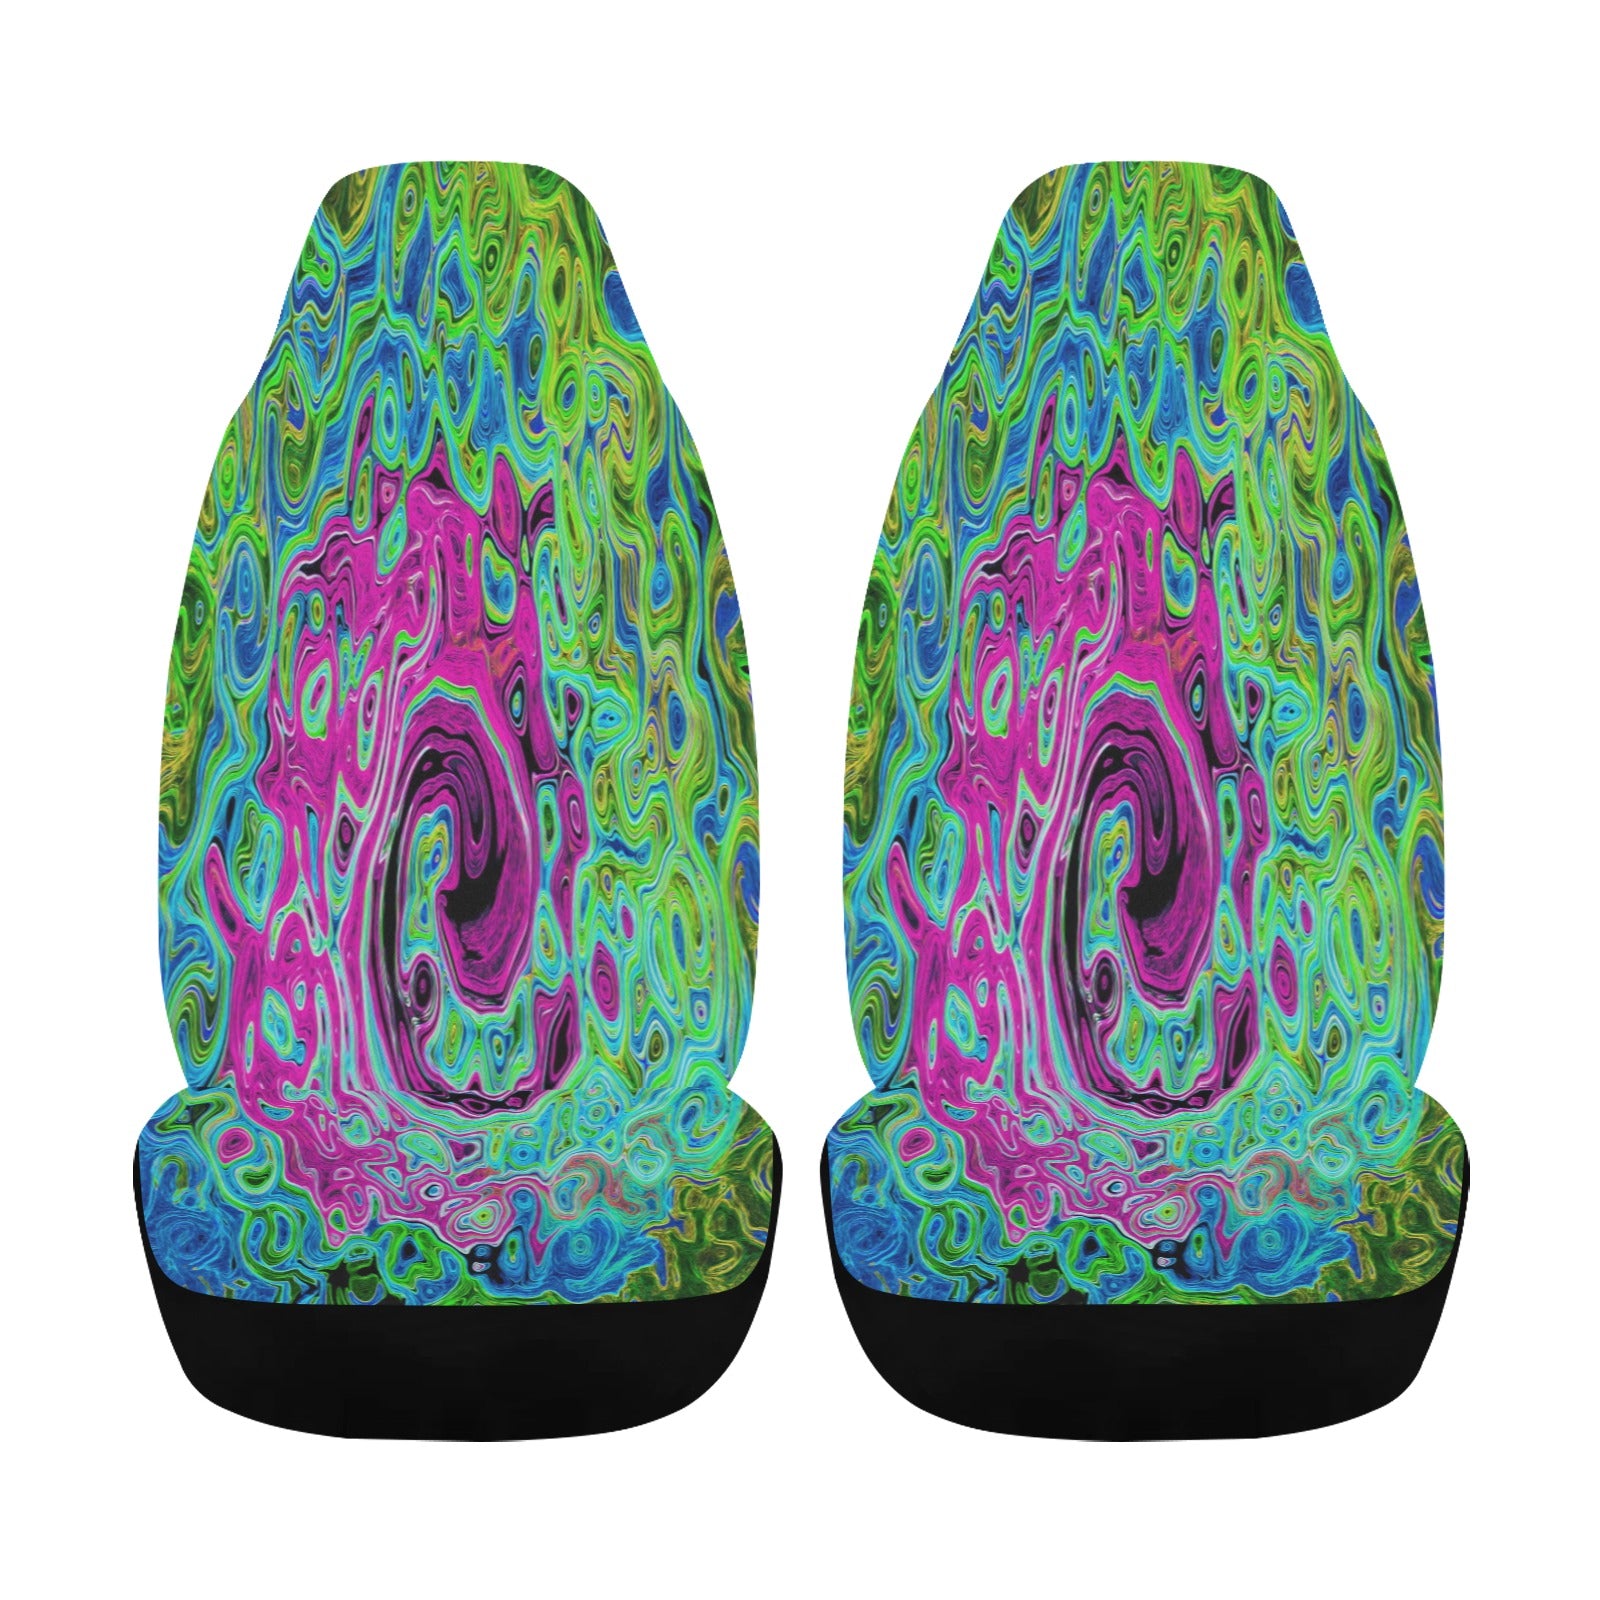 Car Seat Covers, Hot Pink and Blue Groovy Abstract Retro Liquid Swirl